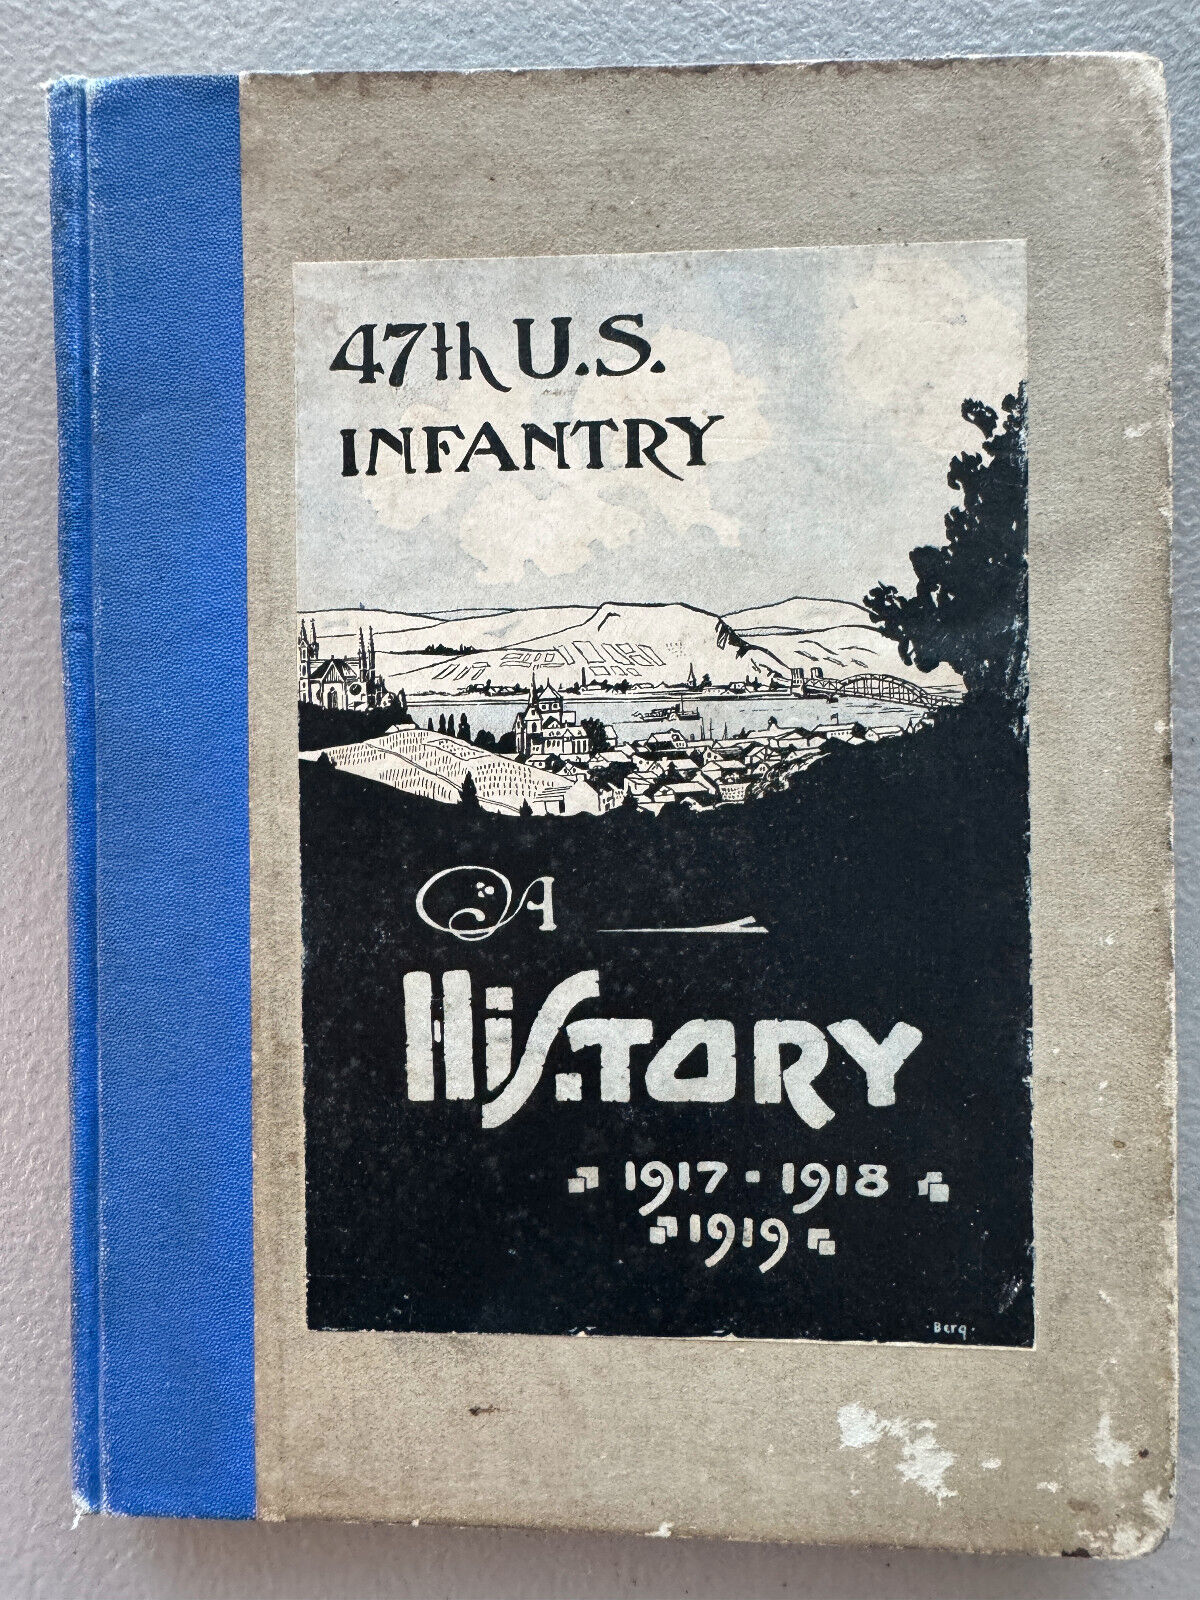 47th Infantry, A History 1917-1919, WWI Unit History Book